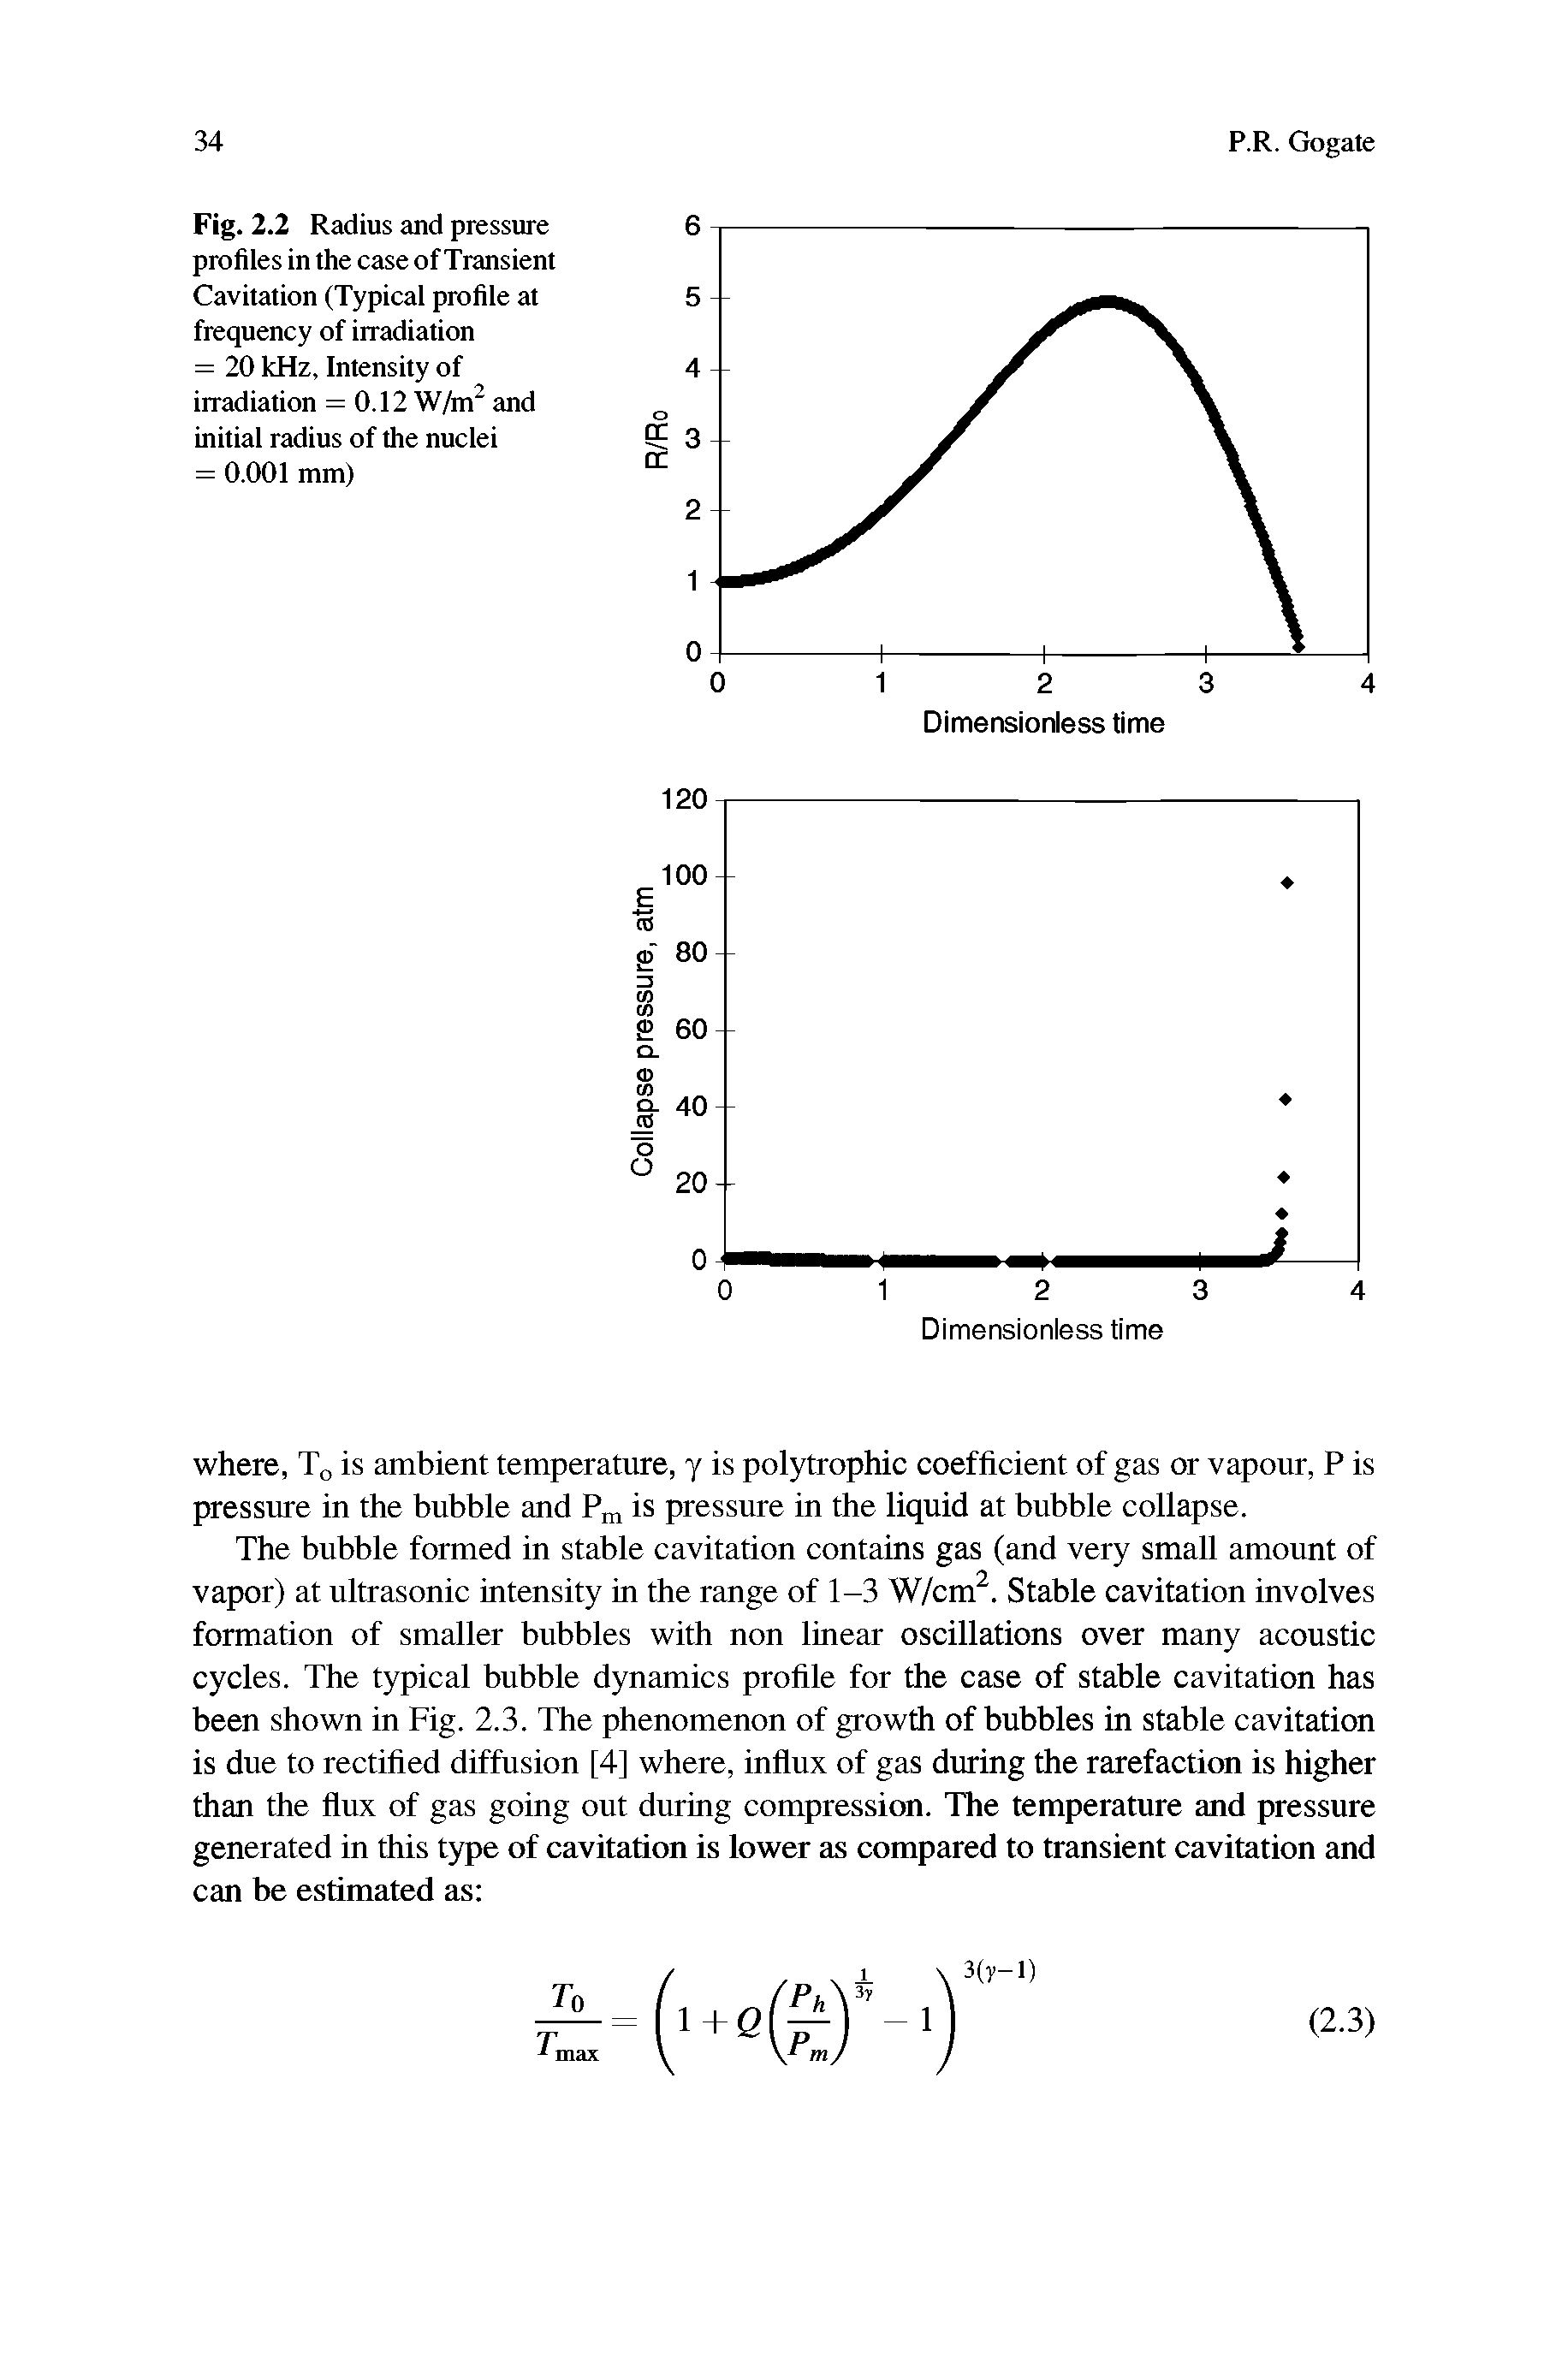 Fig. 2.2 Radius and pressure profiles in the case of Transient Cavitation (Typical profile at frequency of irradiation = 20 kHz, Intensity of irradiation = 0.12 W/m2 and initial radius of the nuclei = 0.001 mm)...